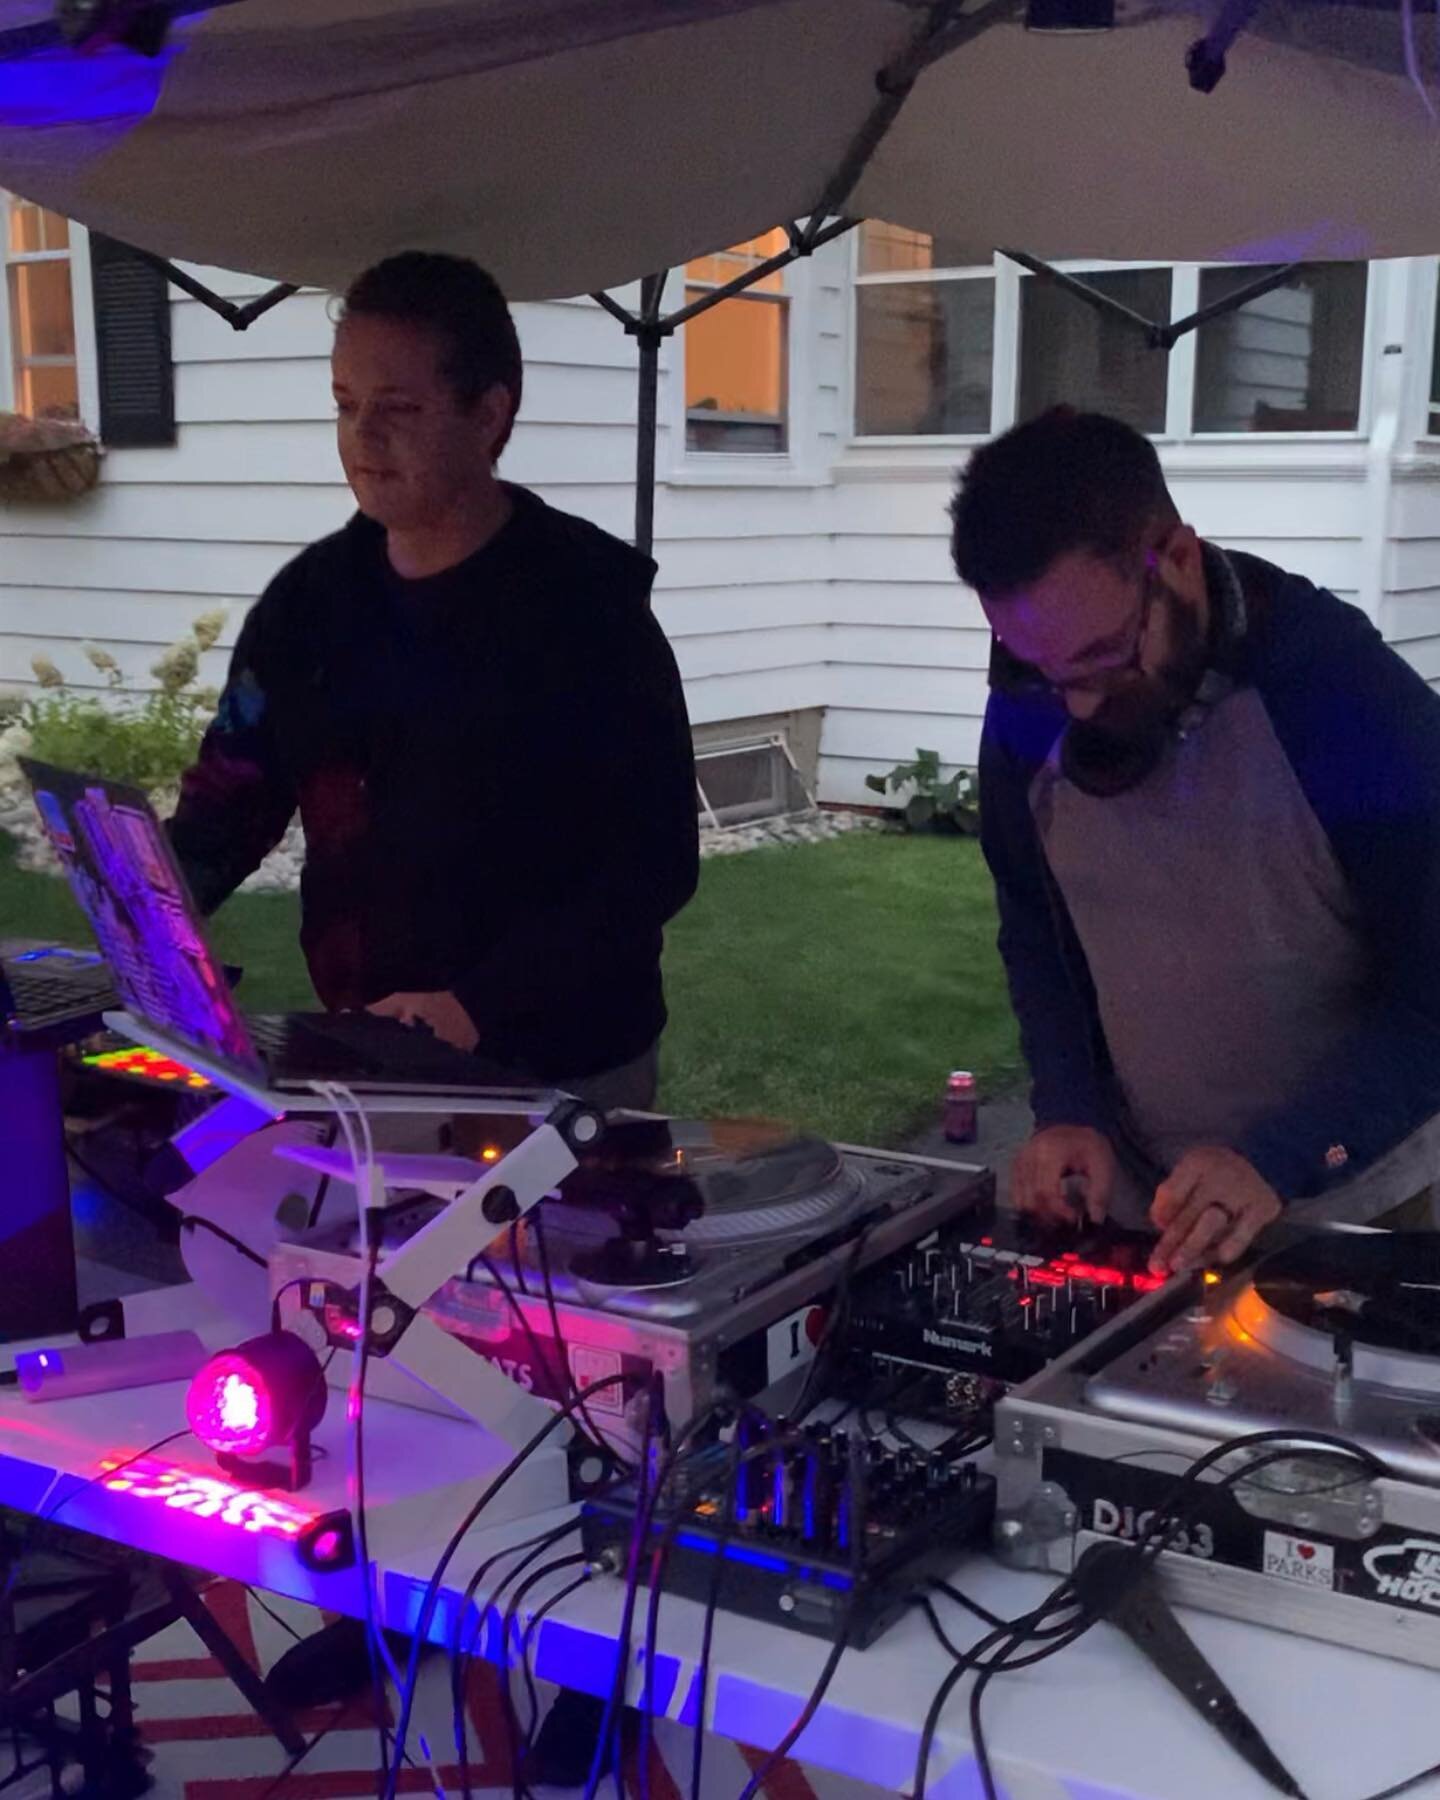 DJ Dads holding down the Grace Ave block party. Super fun to get behind the decks for kids and adults. Love the on-the-fly mixes @dstur001 and I put together. 📷
.
.
.
#djdad #dadlife #dads #dj #djlifestyle #music #plattsburghny #plattsburgh #graceav